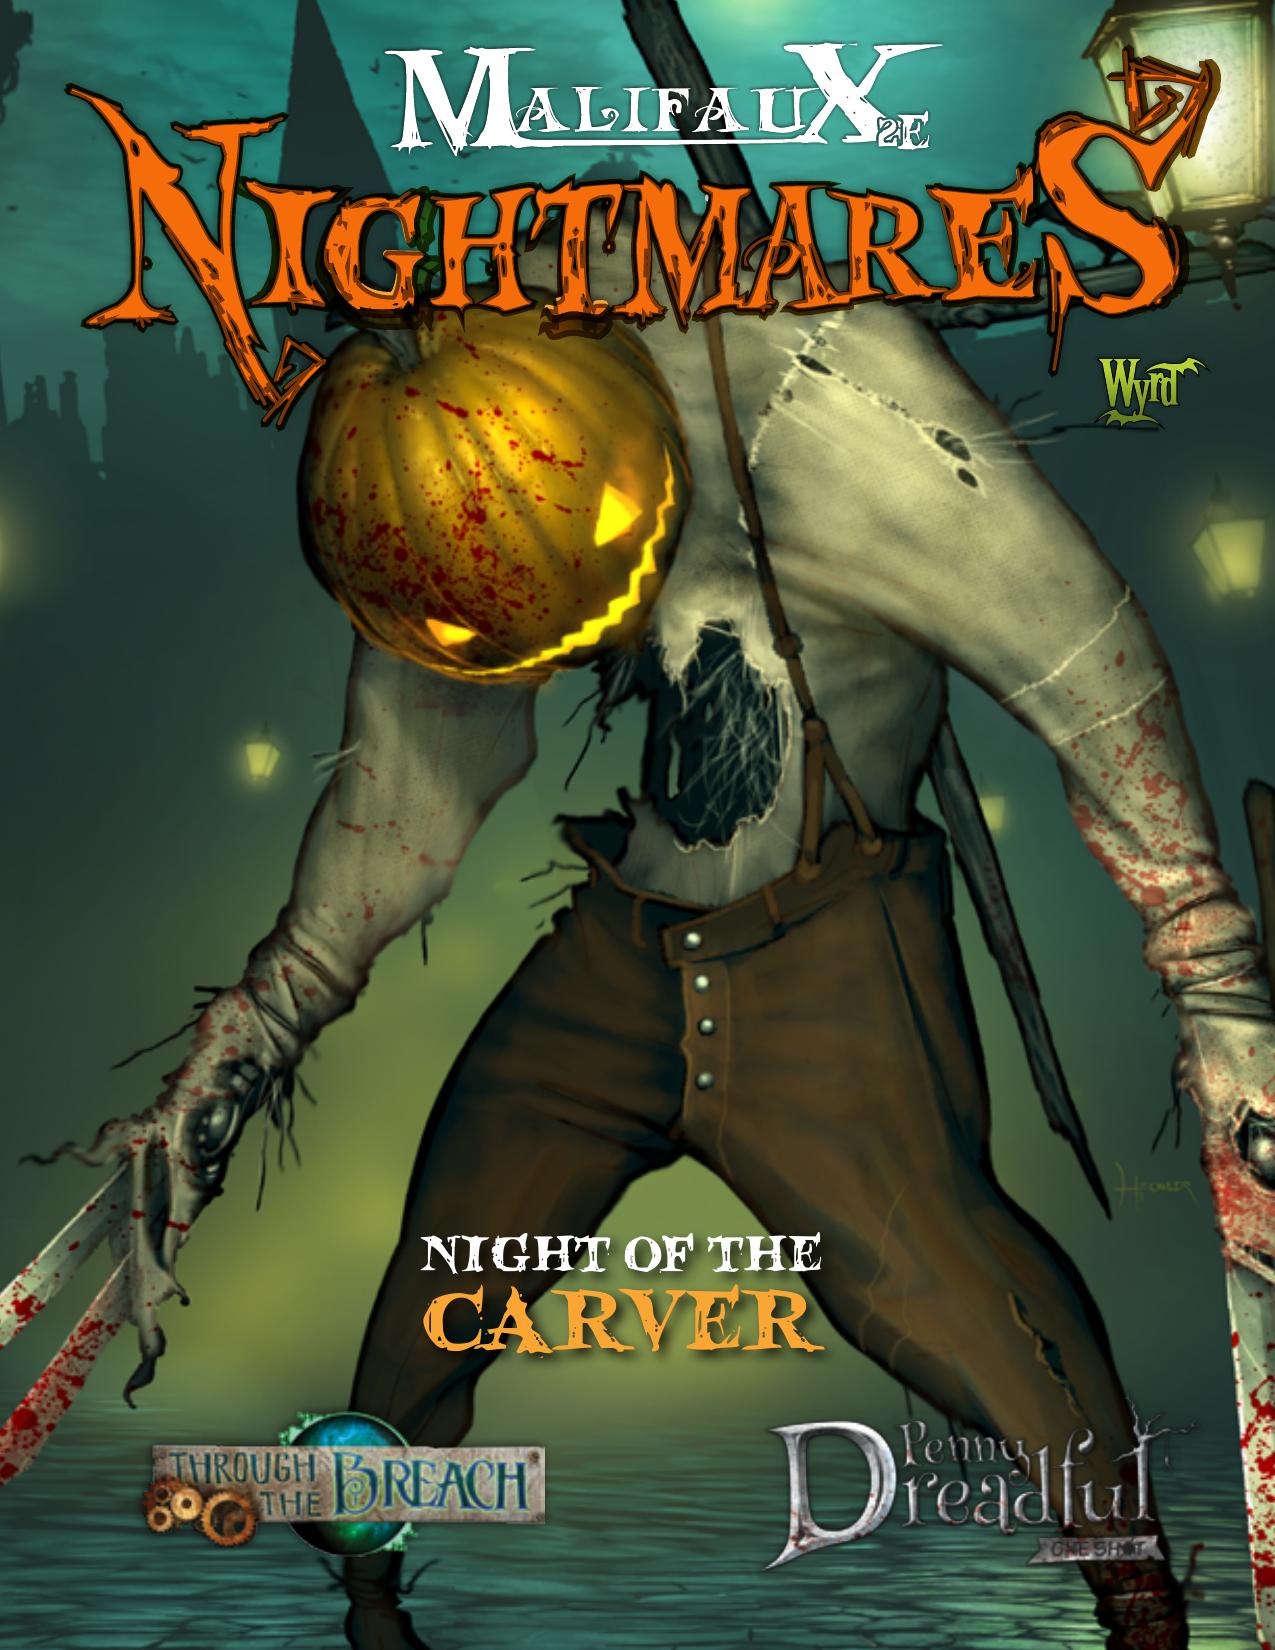 Night of the Carver